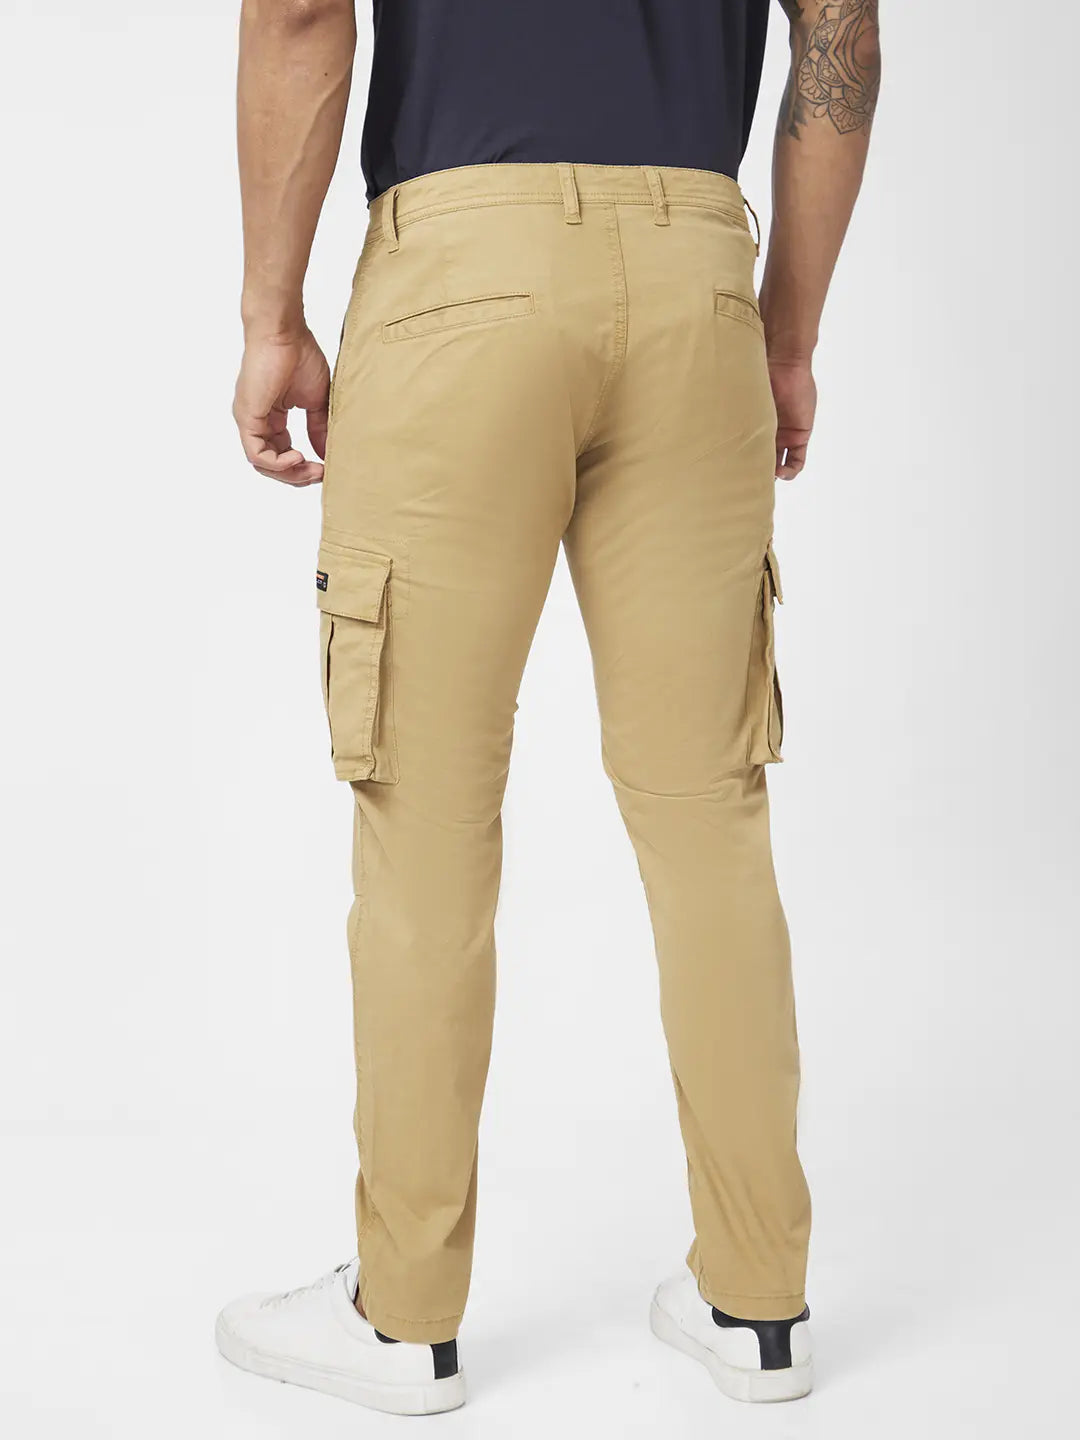 SPYKAR Trousers & Lowers for Men sale - discounted price | FASHIOLA INDIA